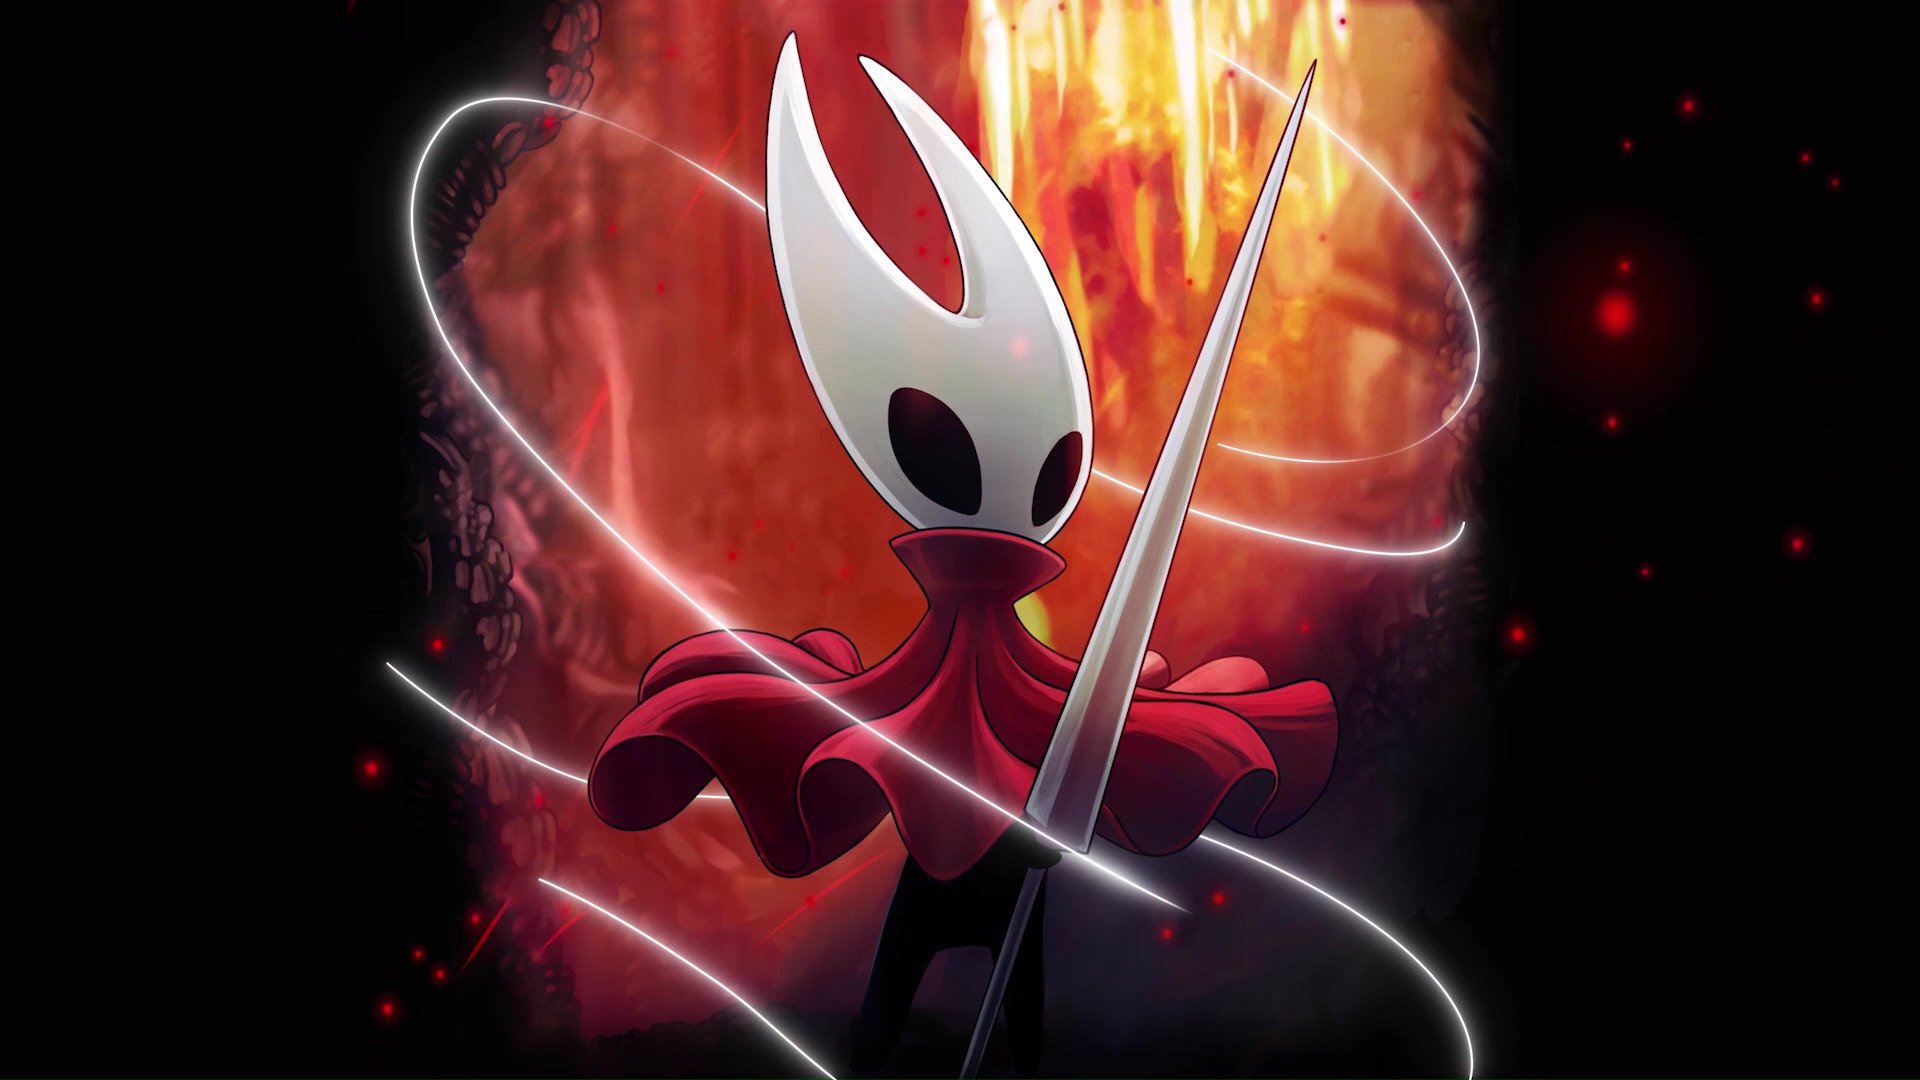 hollow knight silksong ps5